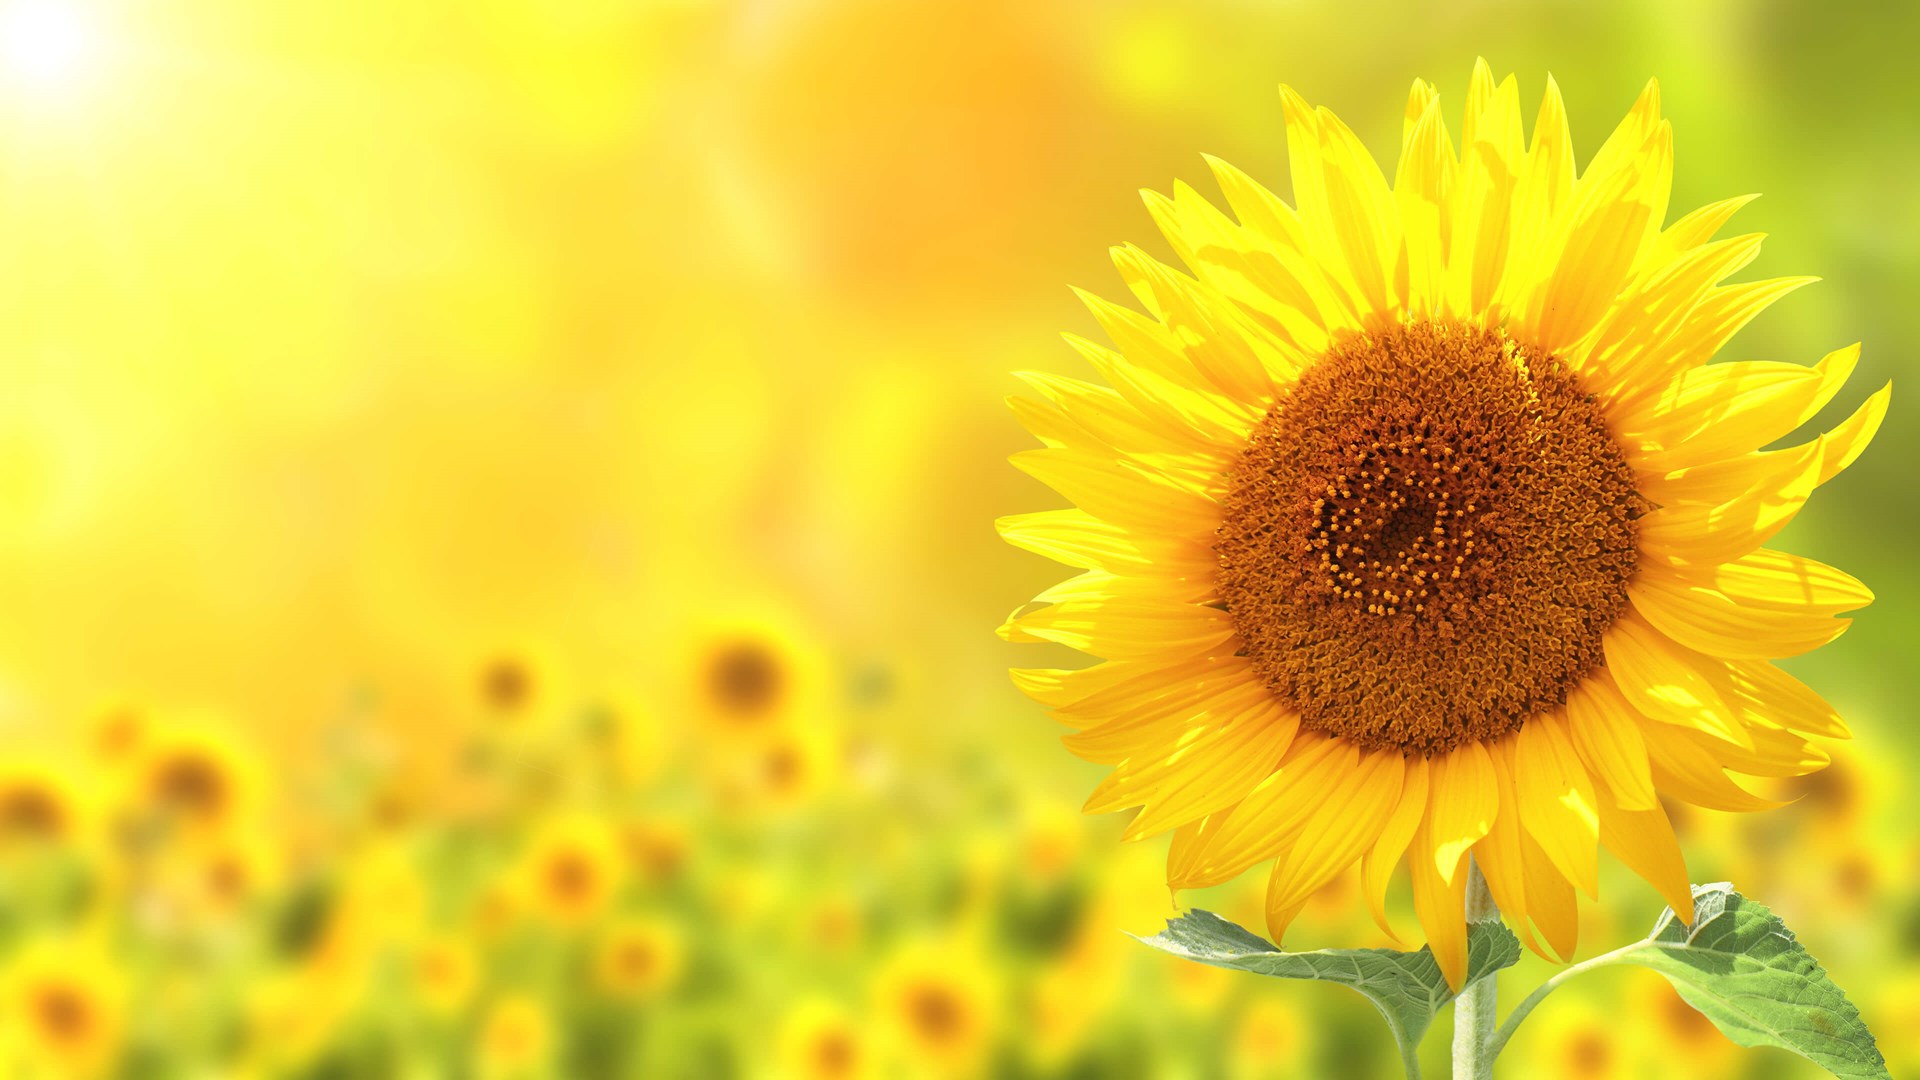 Palsgaard Can Deliver A Broad Range Of Non Palm Emulsifiers Made From Sunflower And Rapeseed Oil